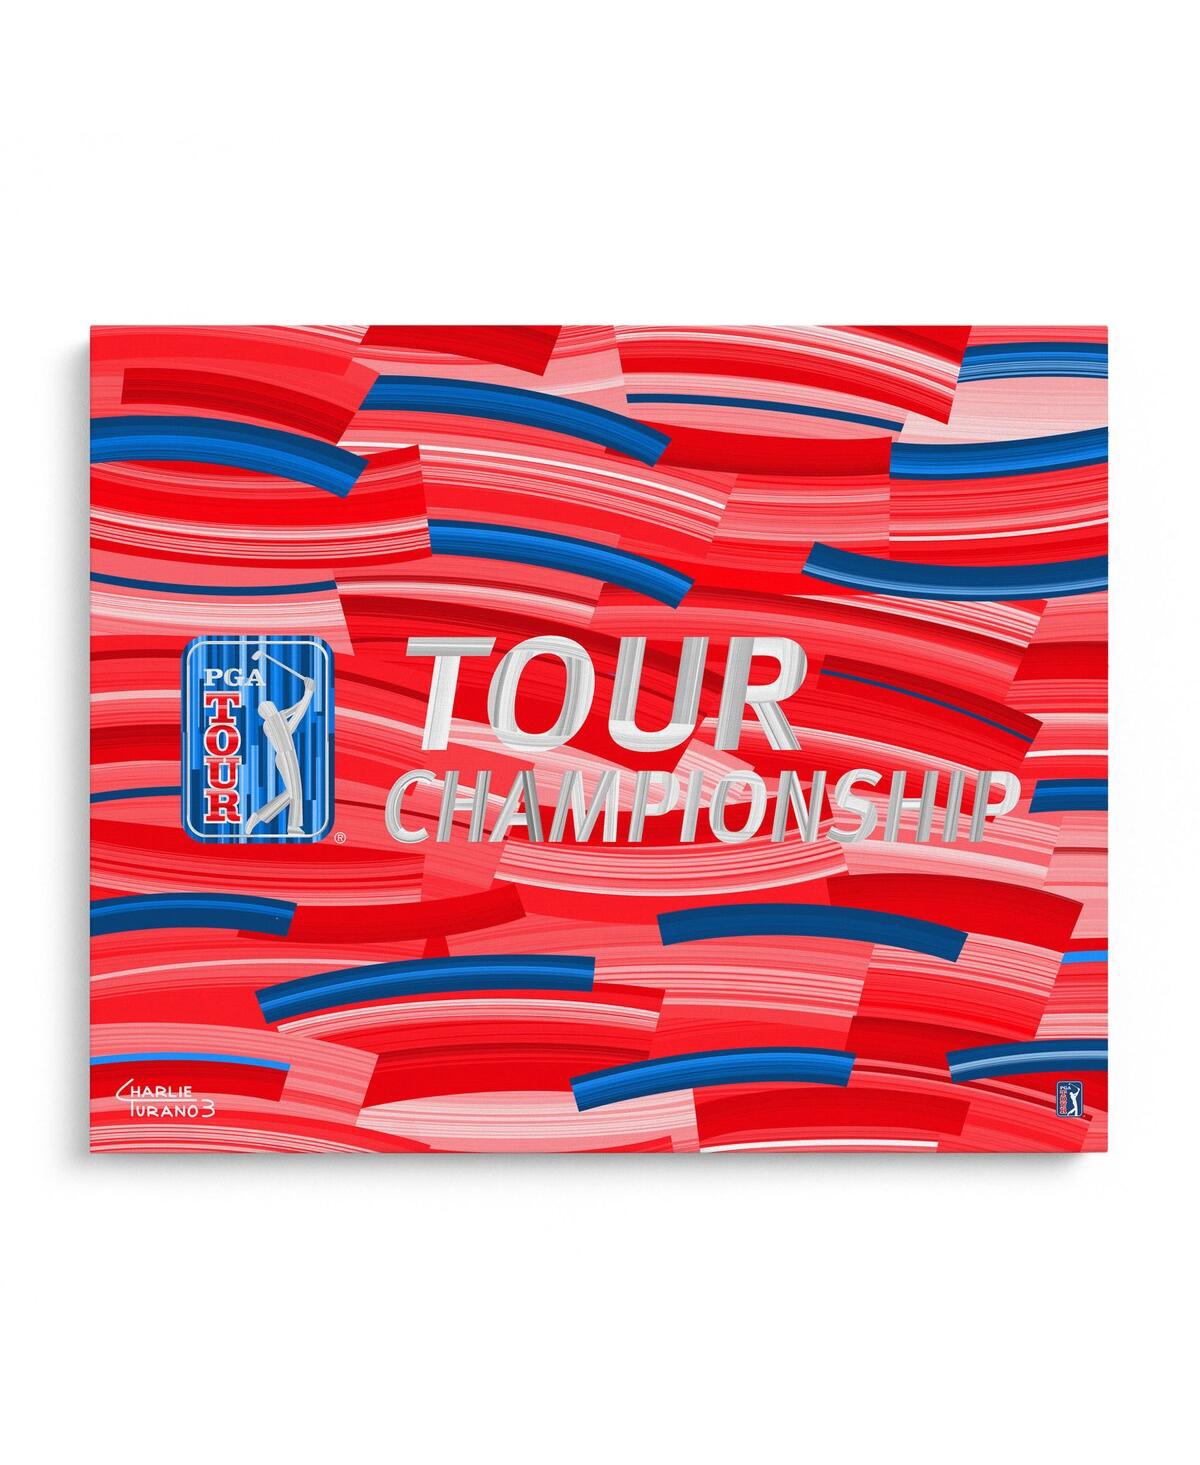 Tour Championship 16'' x 20'' Embellished Giclee Print by Charlie Turano Iii - Red